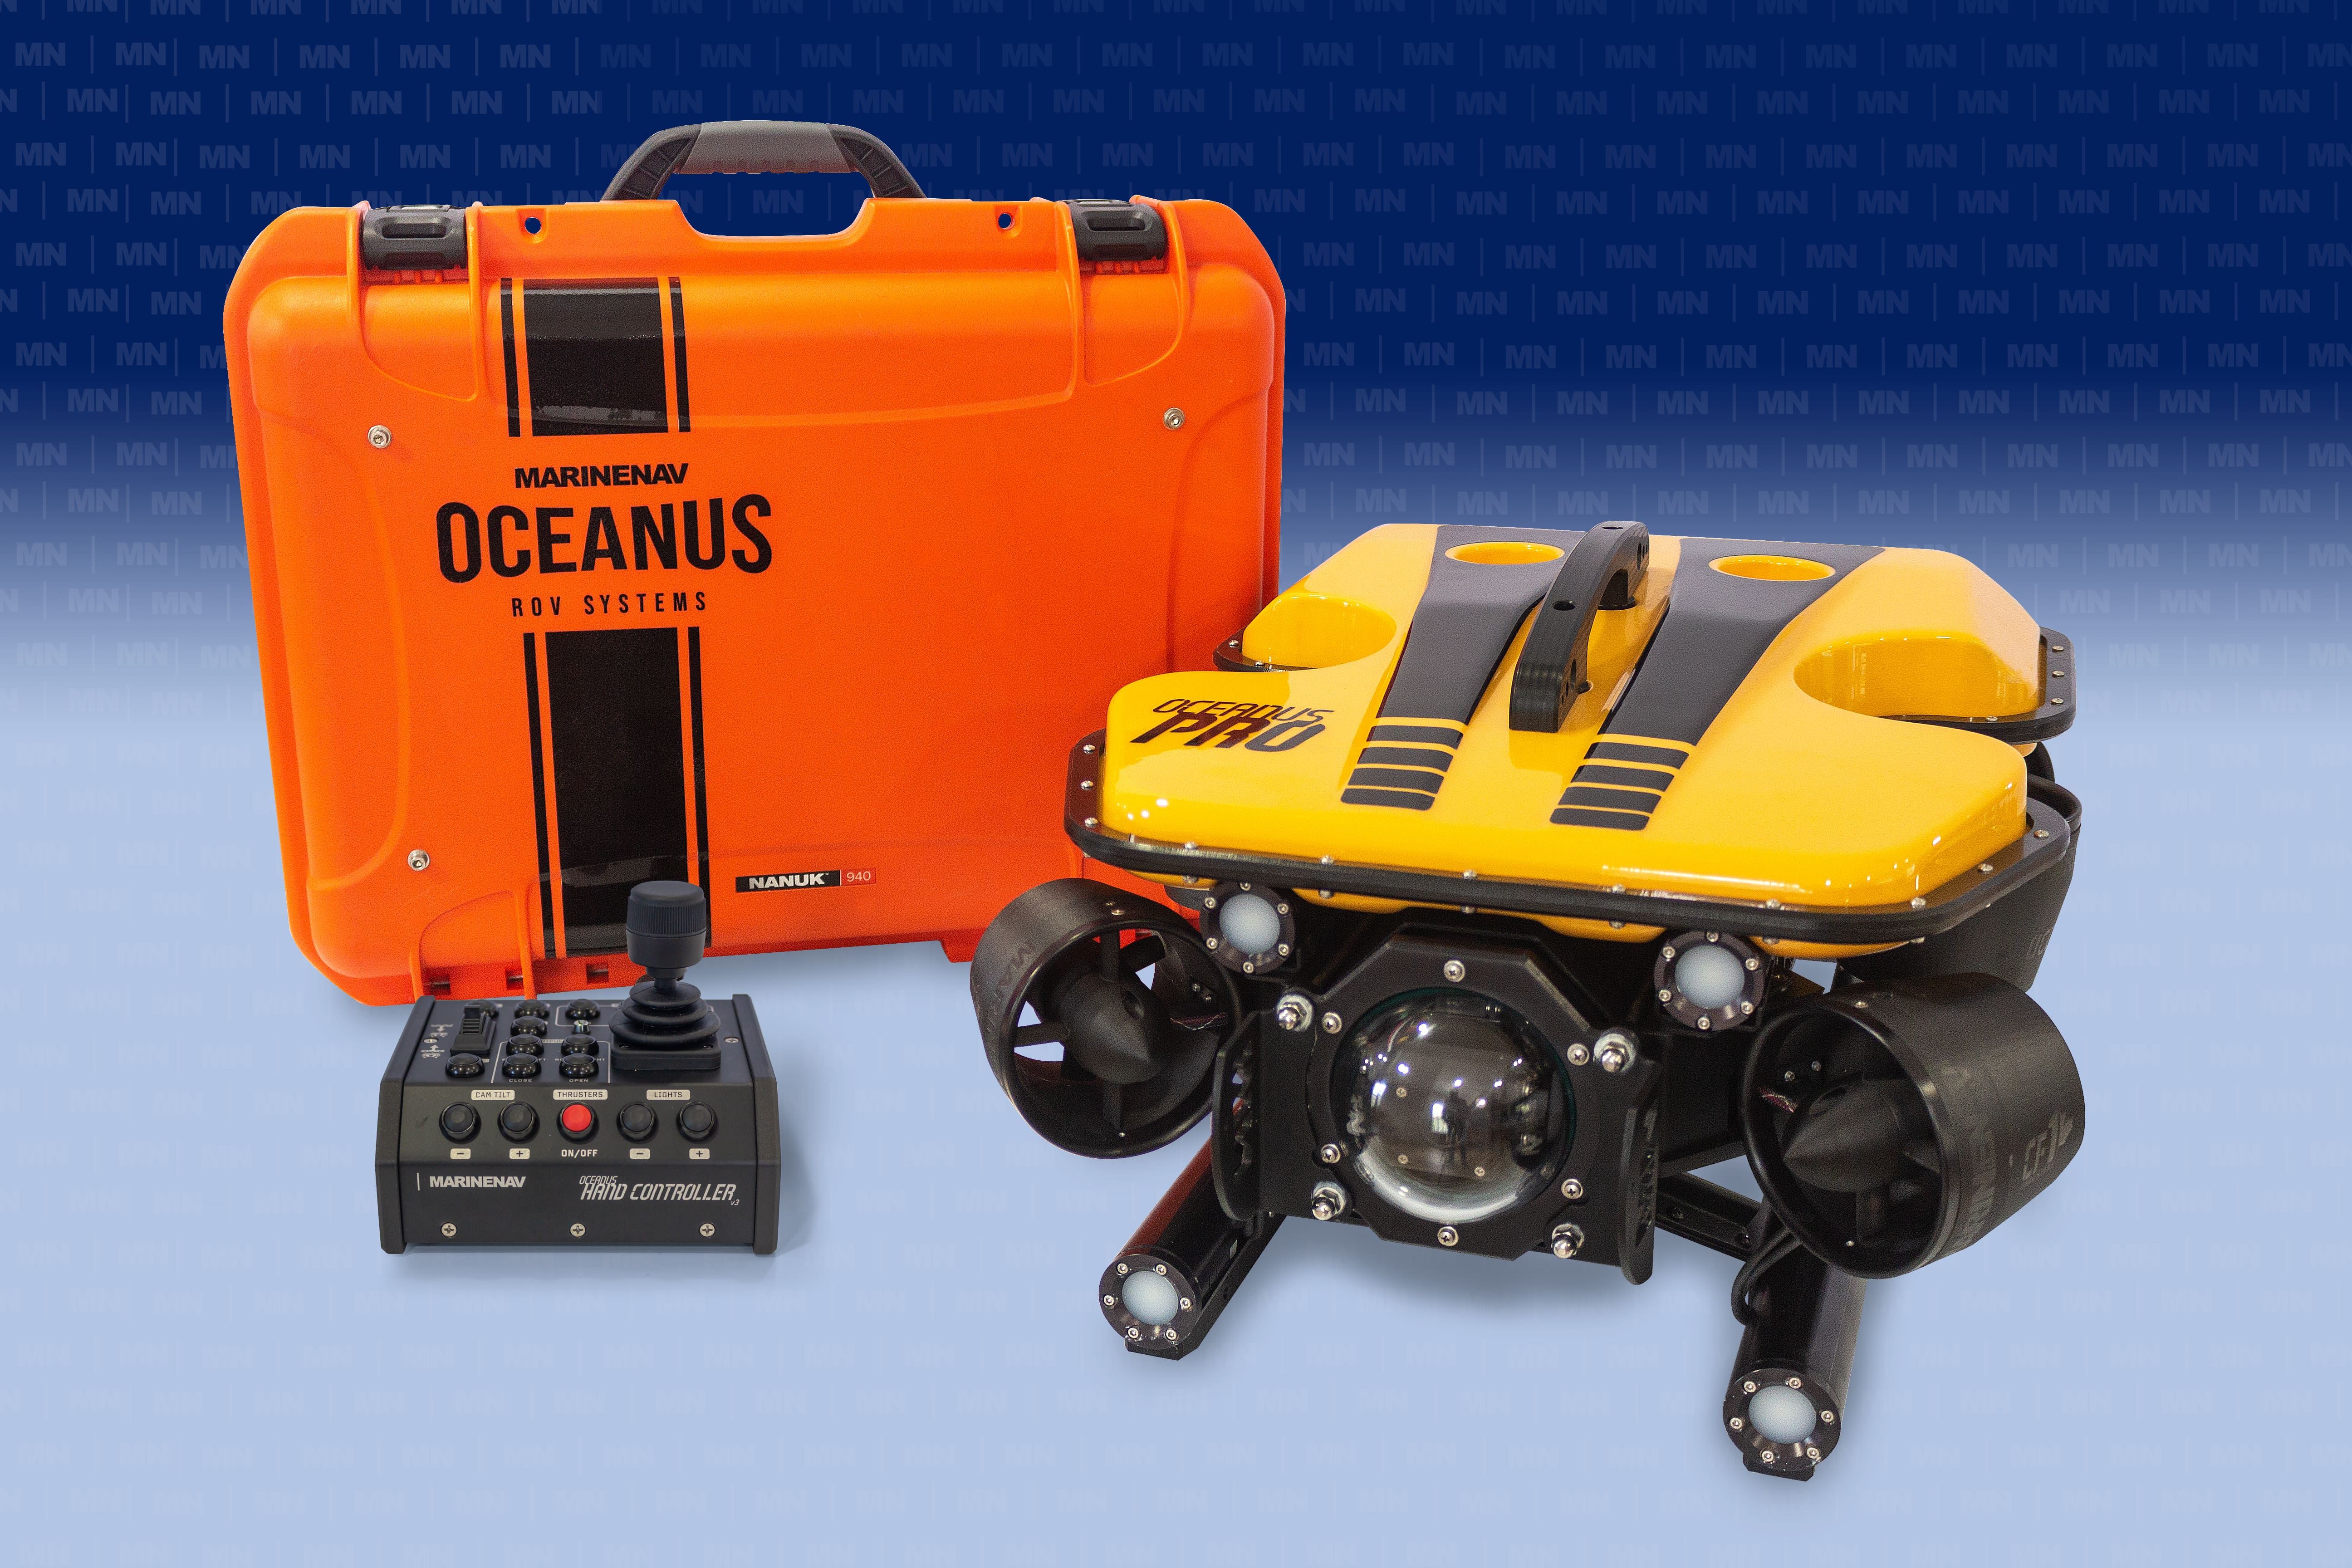 The Oceanus Pro ROV system. Our most popular ROV system includes the Oceanus Pro ROV, a Mini/Pro topside control case and a Oceanus hand controller (v3.0)